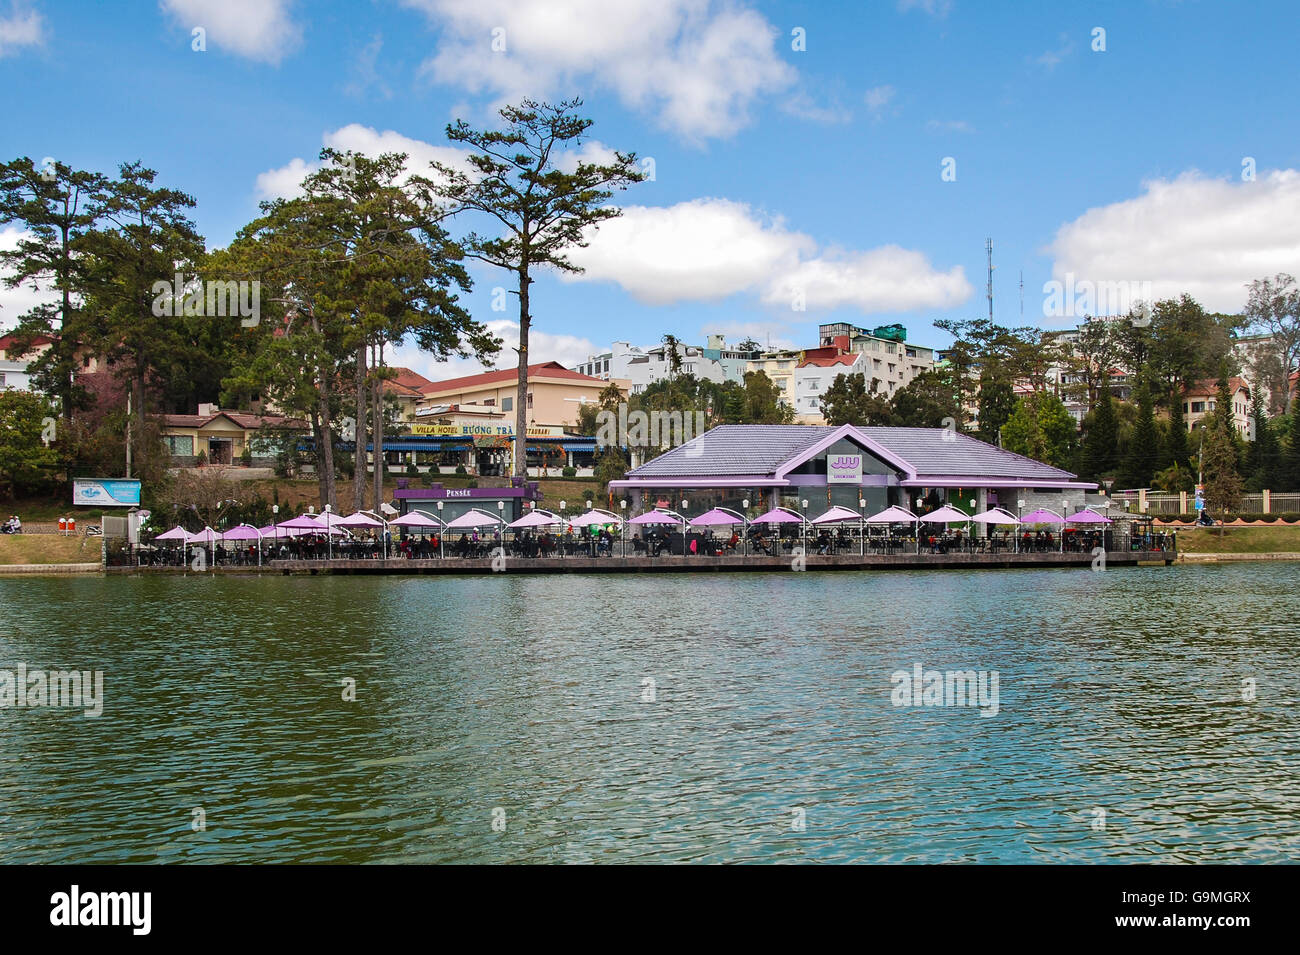 A restaurant at the lakeside. Stock Photo